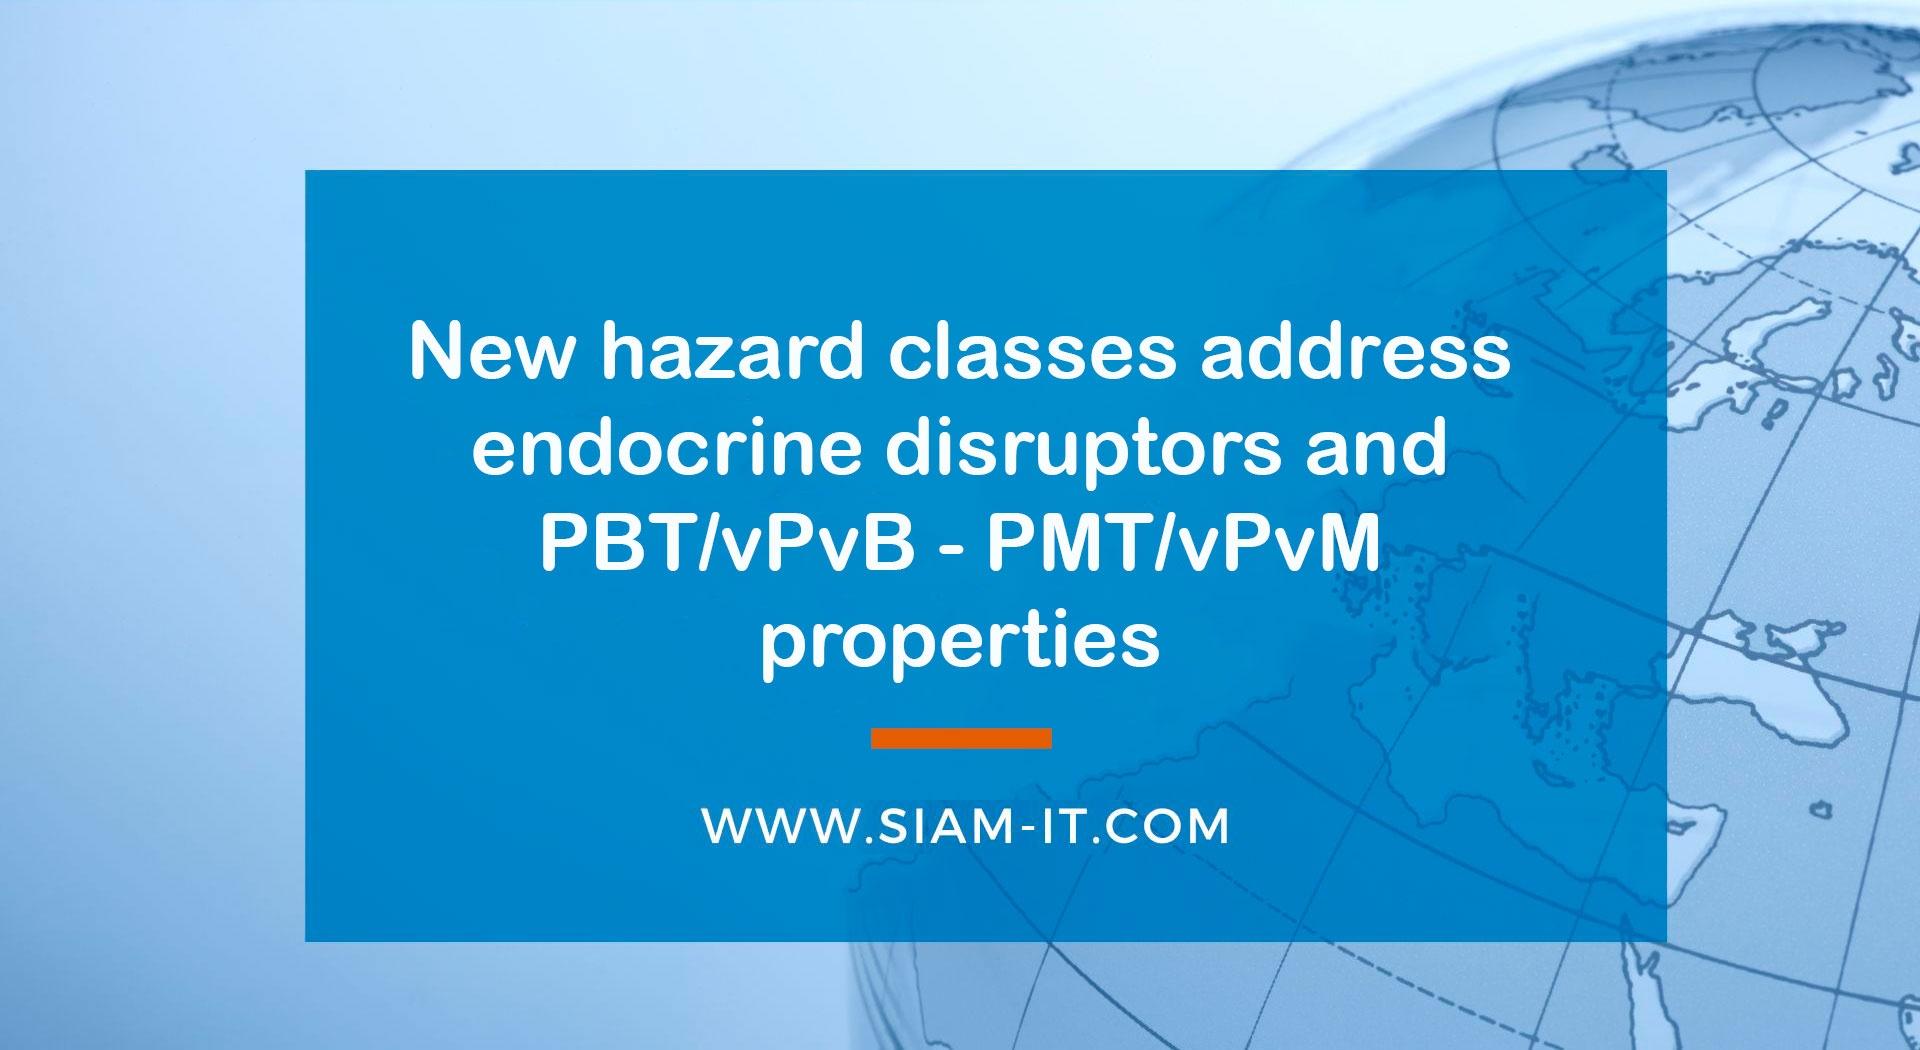 IT'S OFFICIAL: NEW CLP HAZARD CLASSES OFFICIALLY PUBLISHED